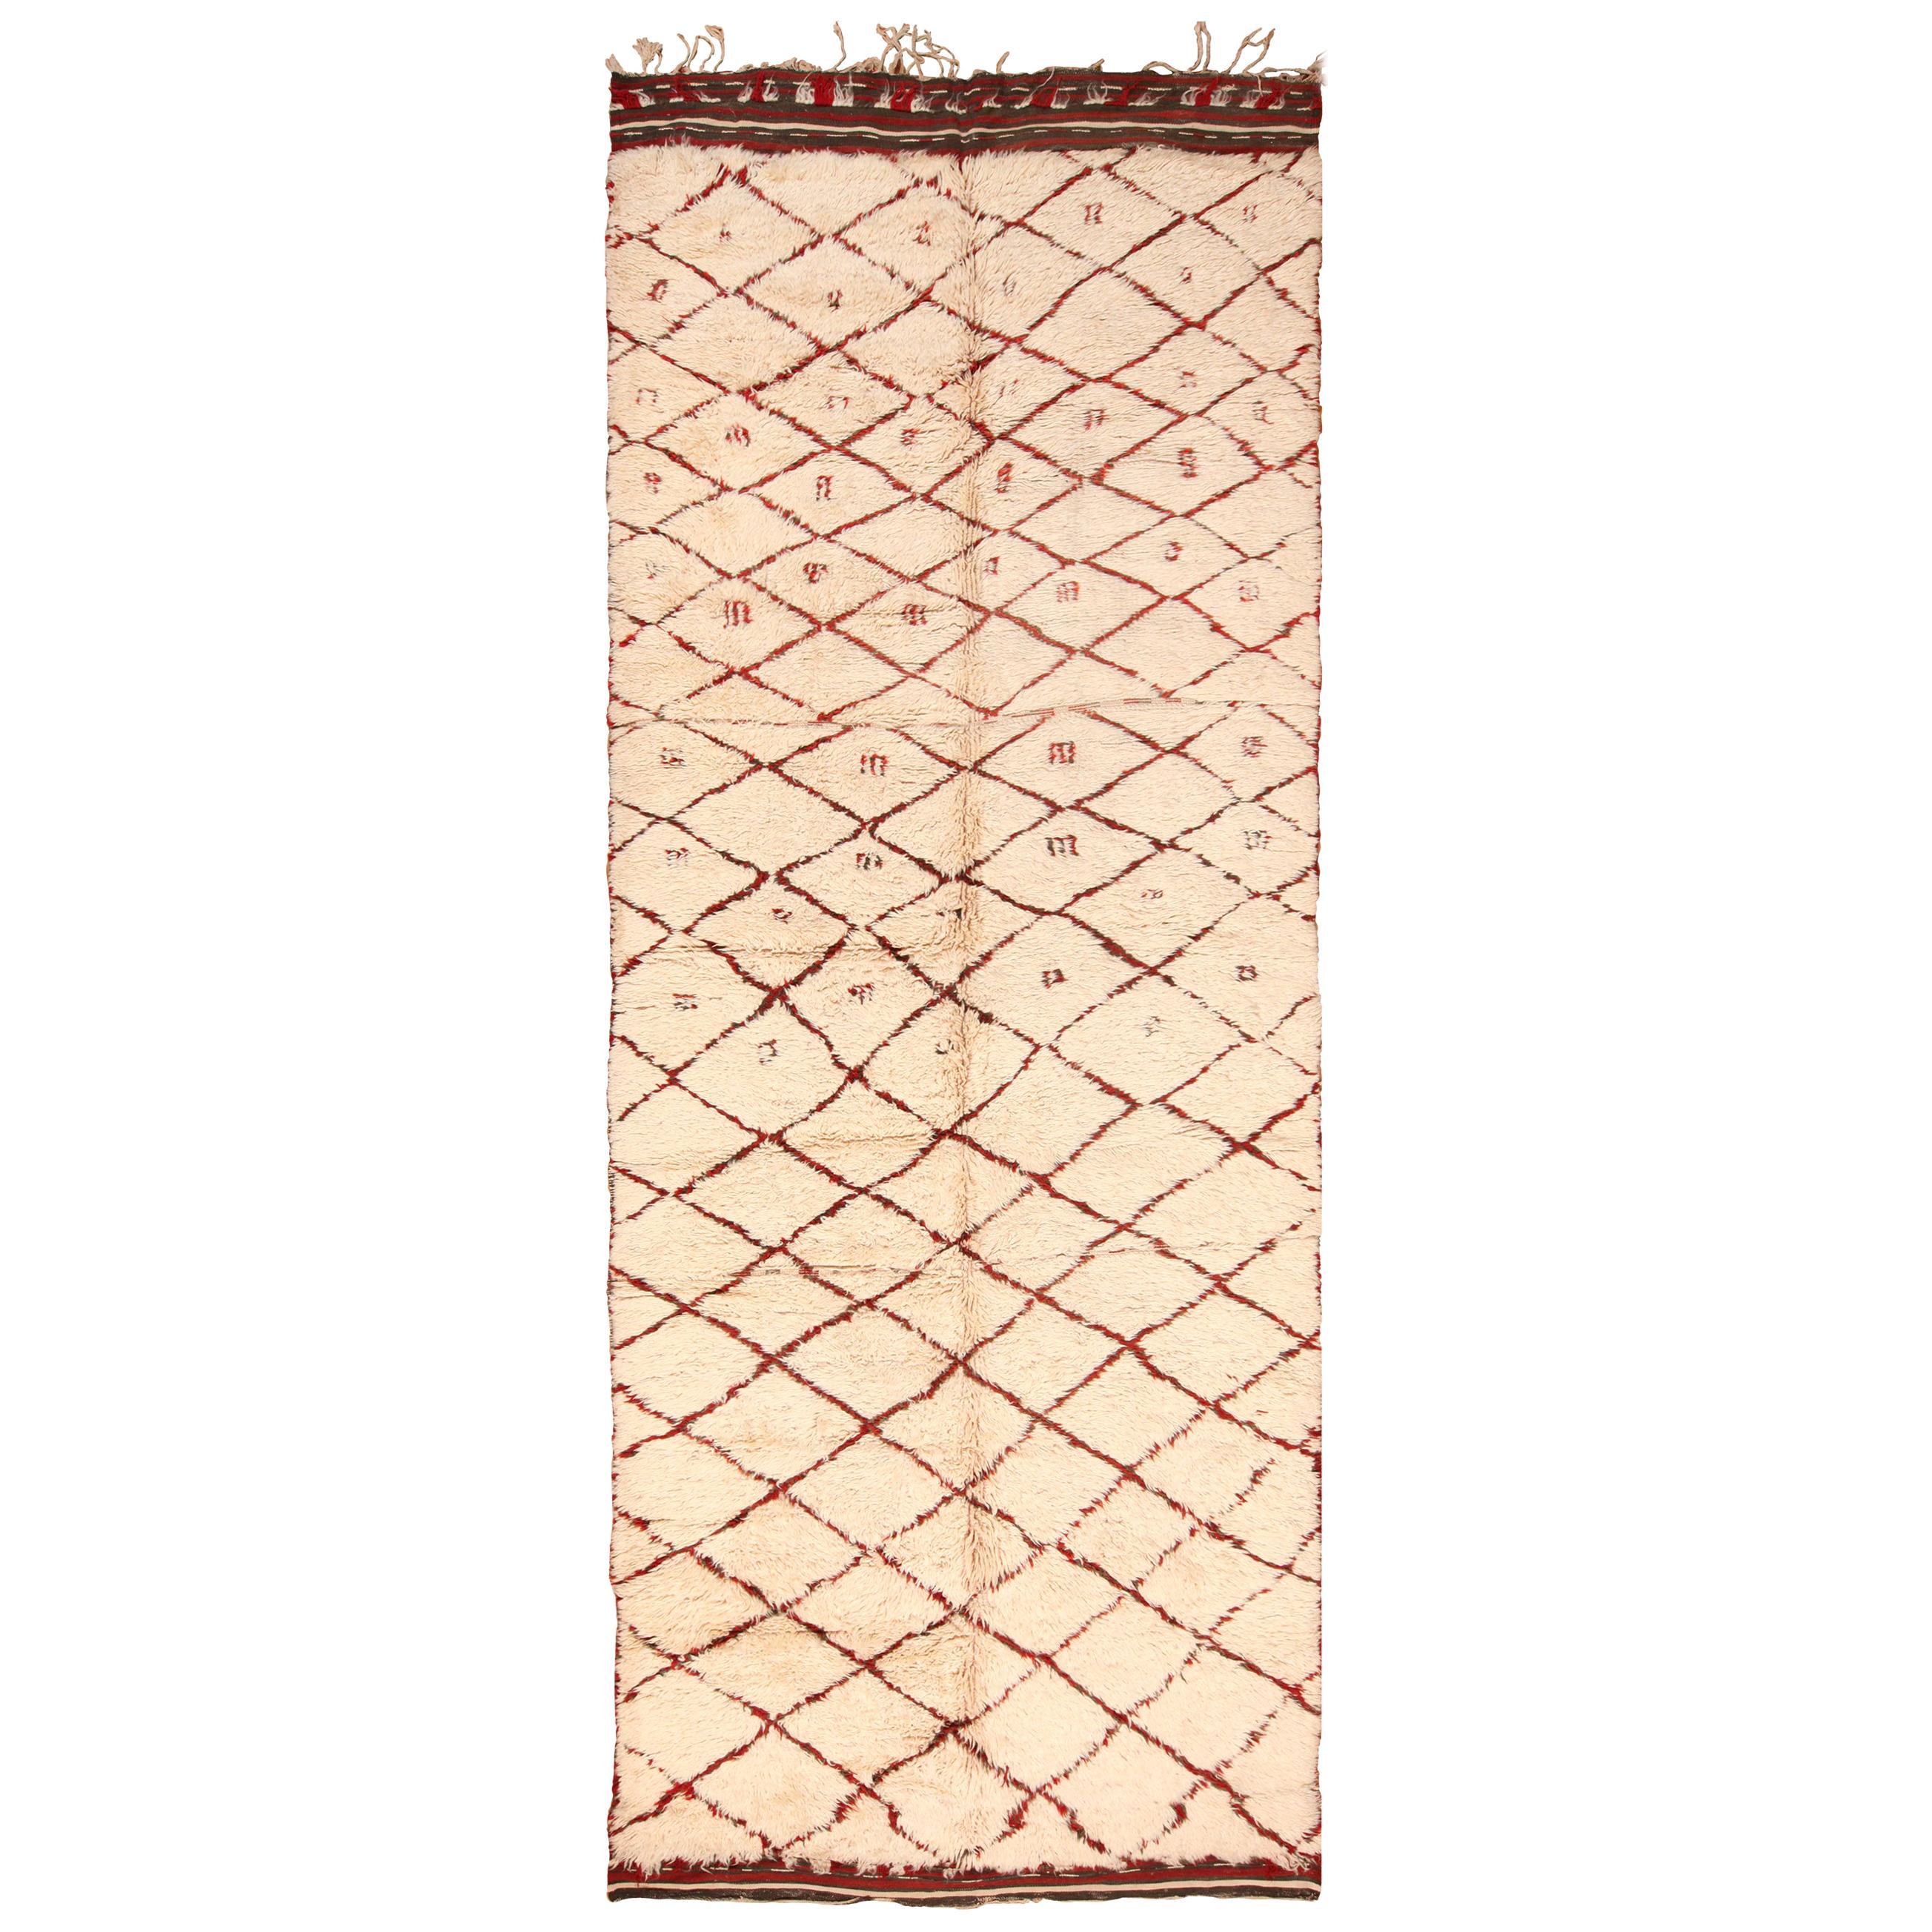 Vintage Gallery Size Moroccan Berber Rug. Size: 6 ft. 6 in x 16 ft. 7 in